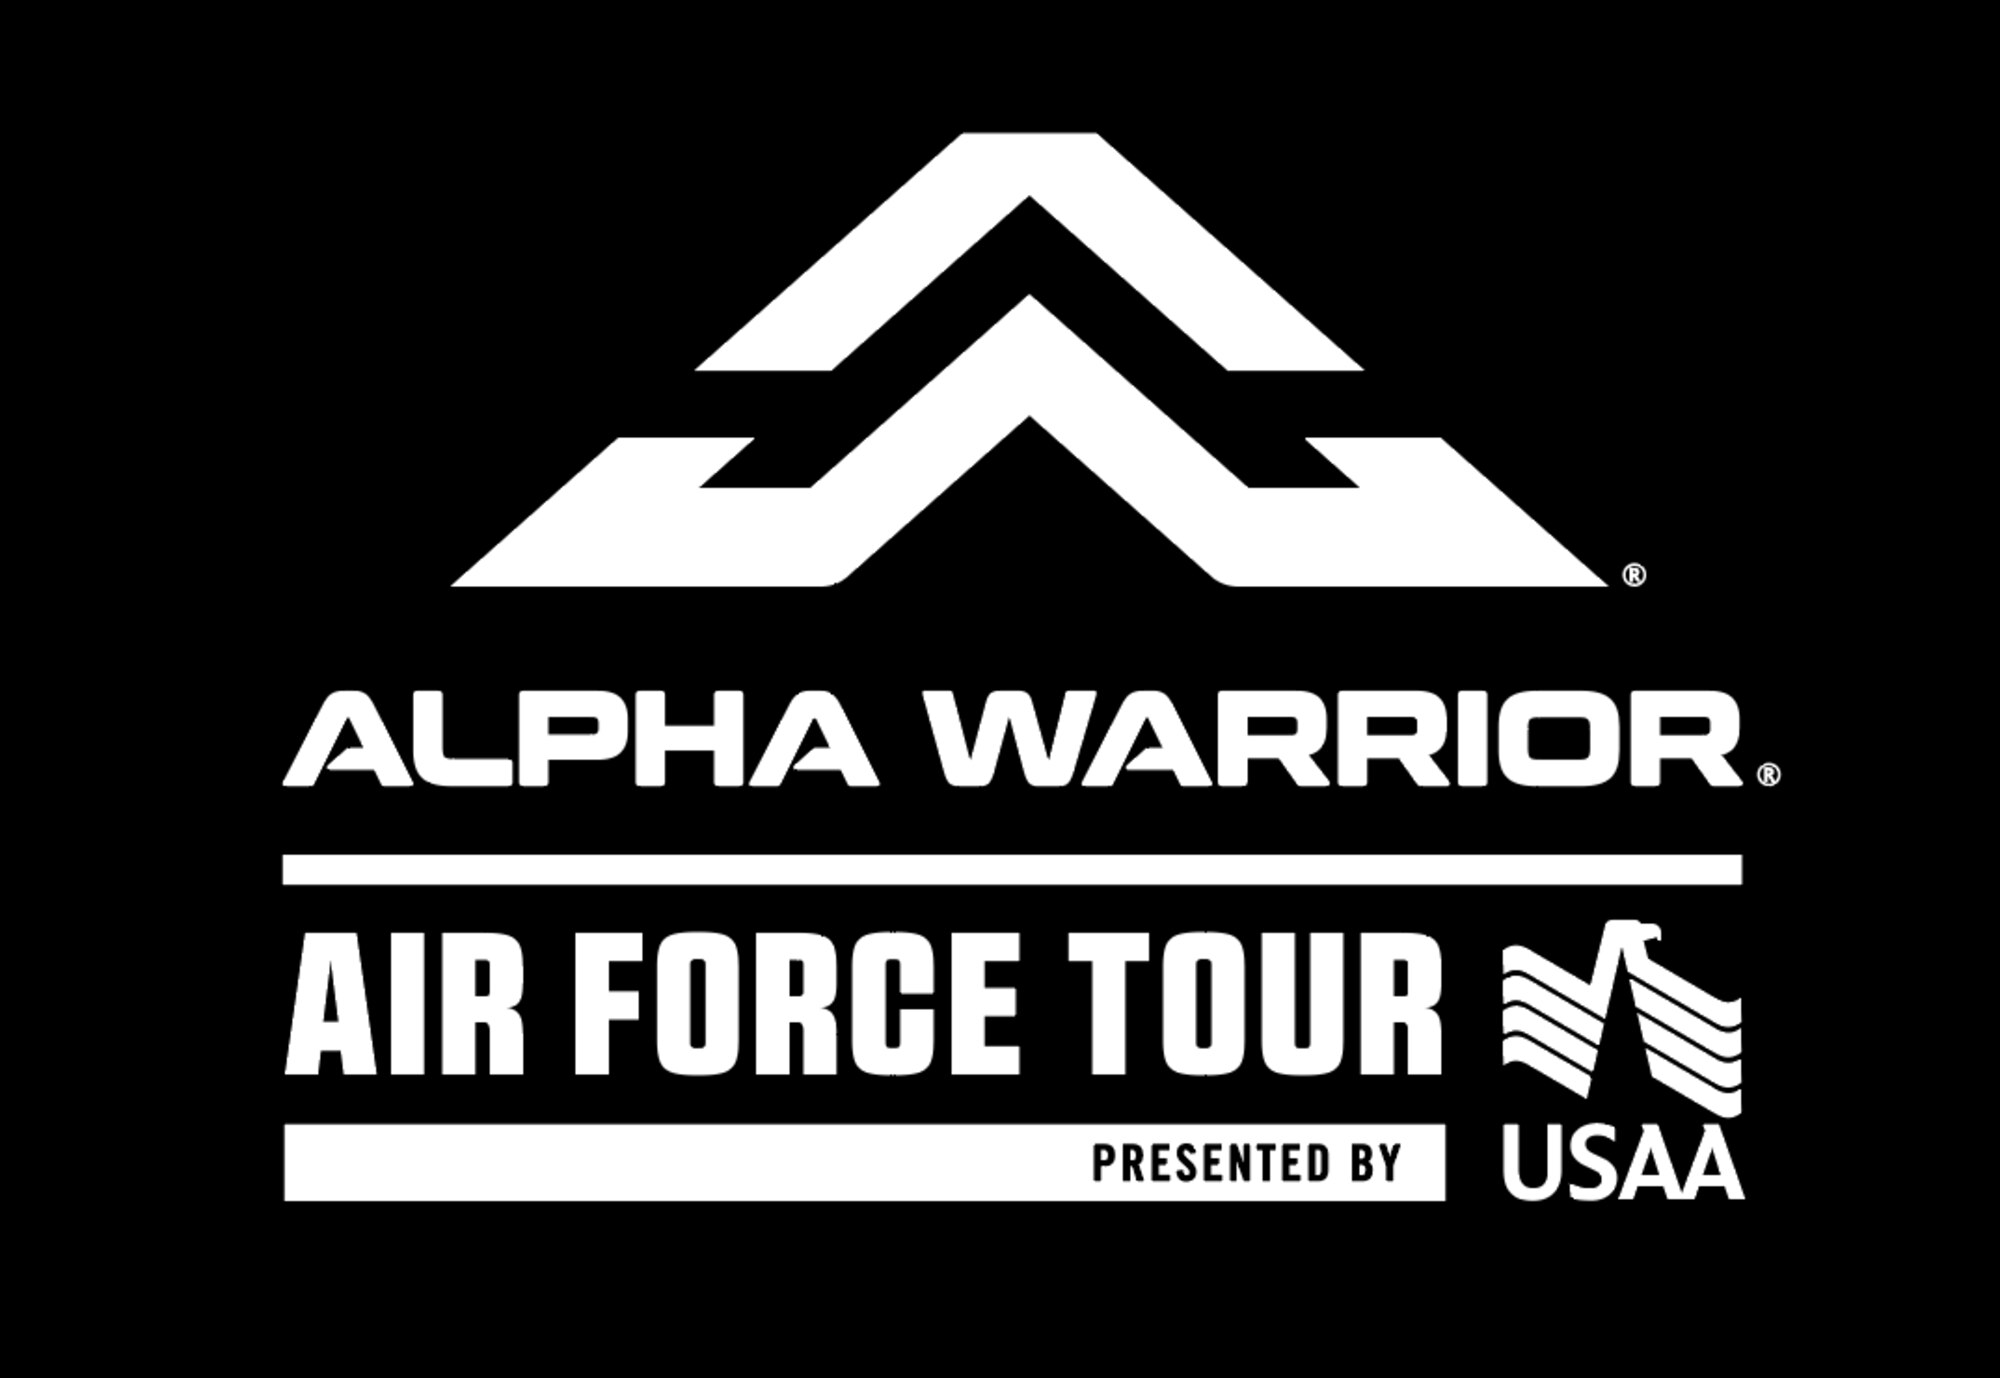 The Alpha Warrior Tour is scheduled to arrive at McConnell May 26-27. The tour is stopping by several Air Force installations across the country to challenge participants with events that bring a different approach to fitness. (Courtesy graphic)